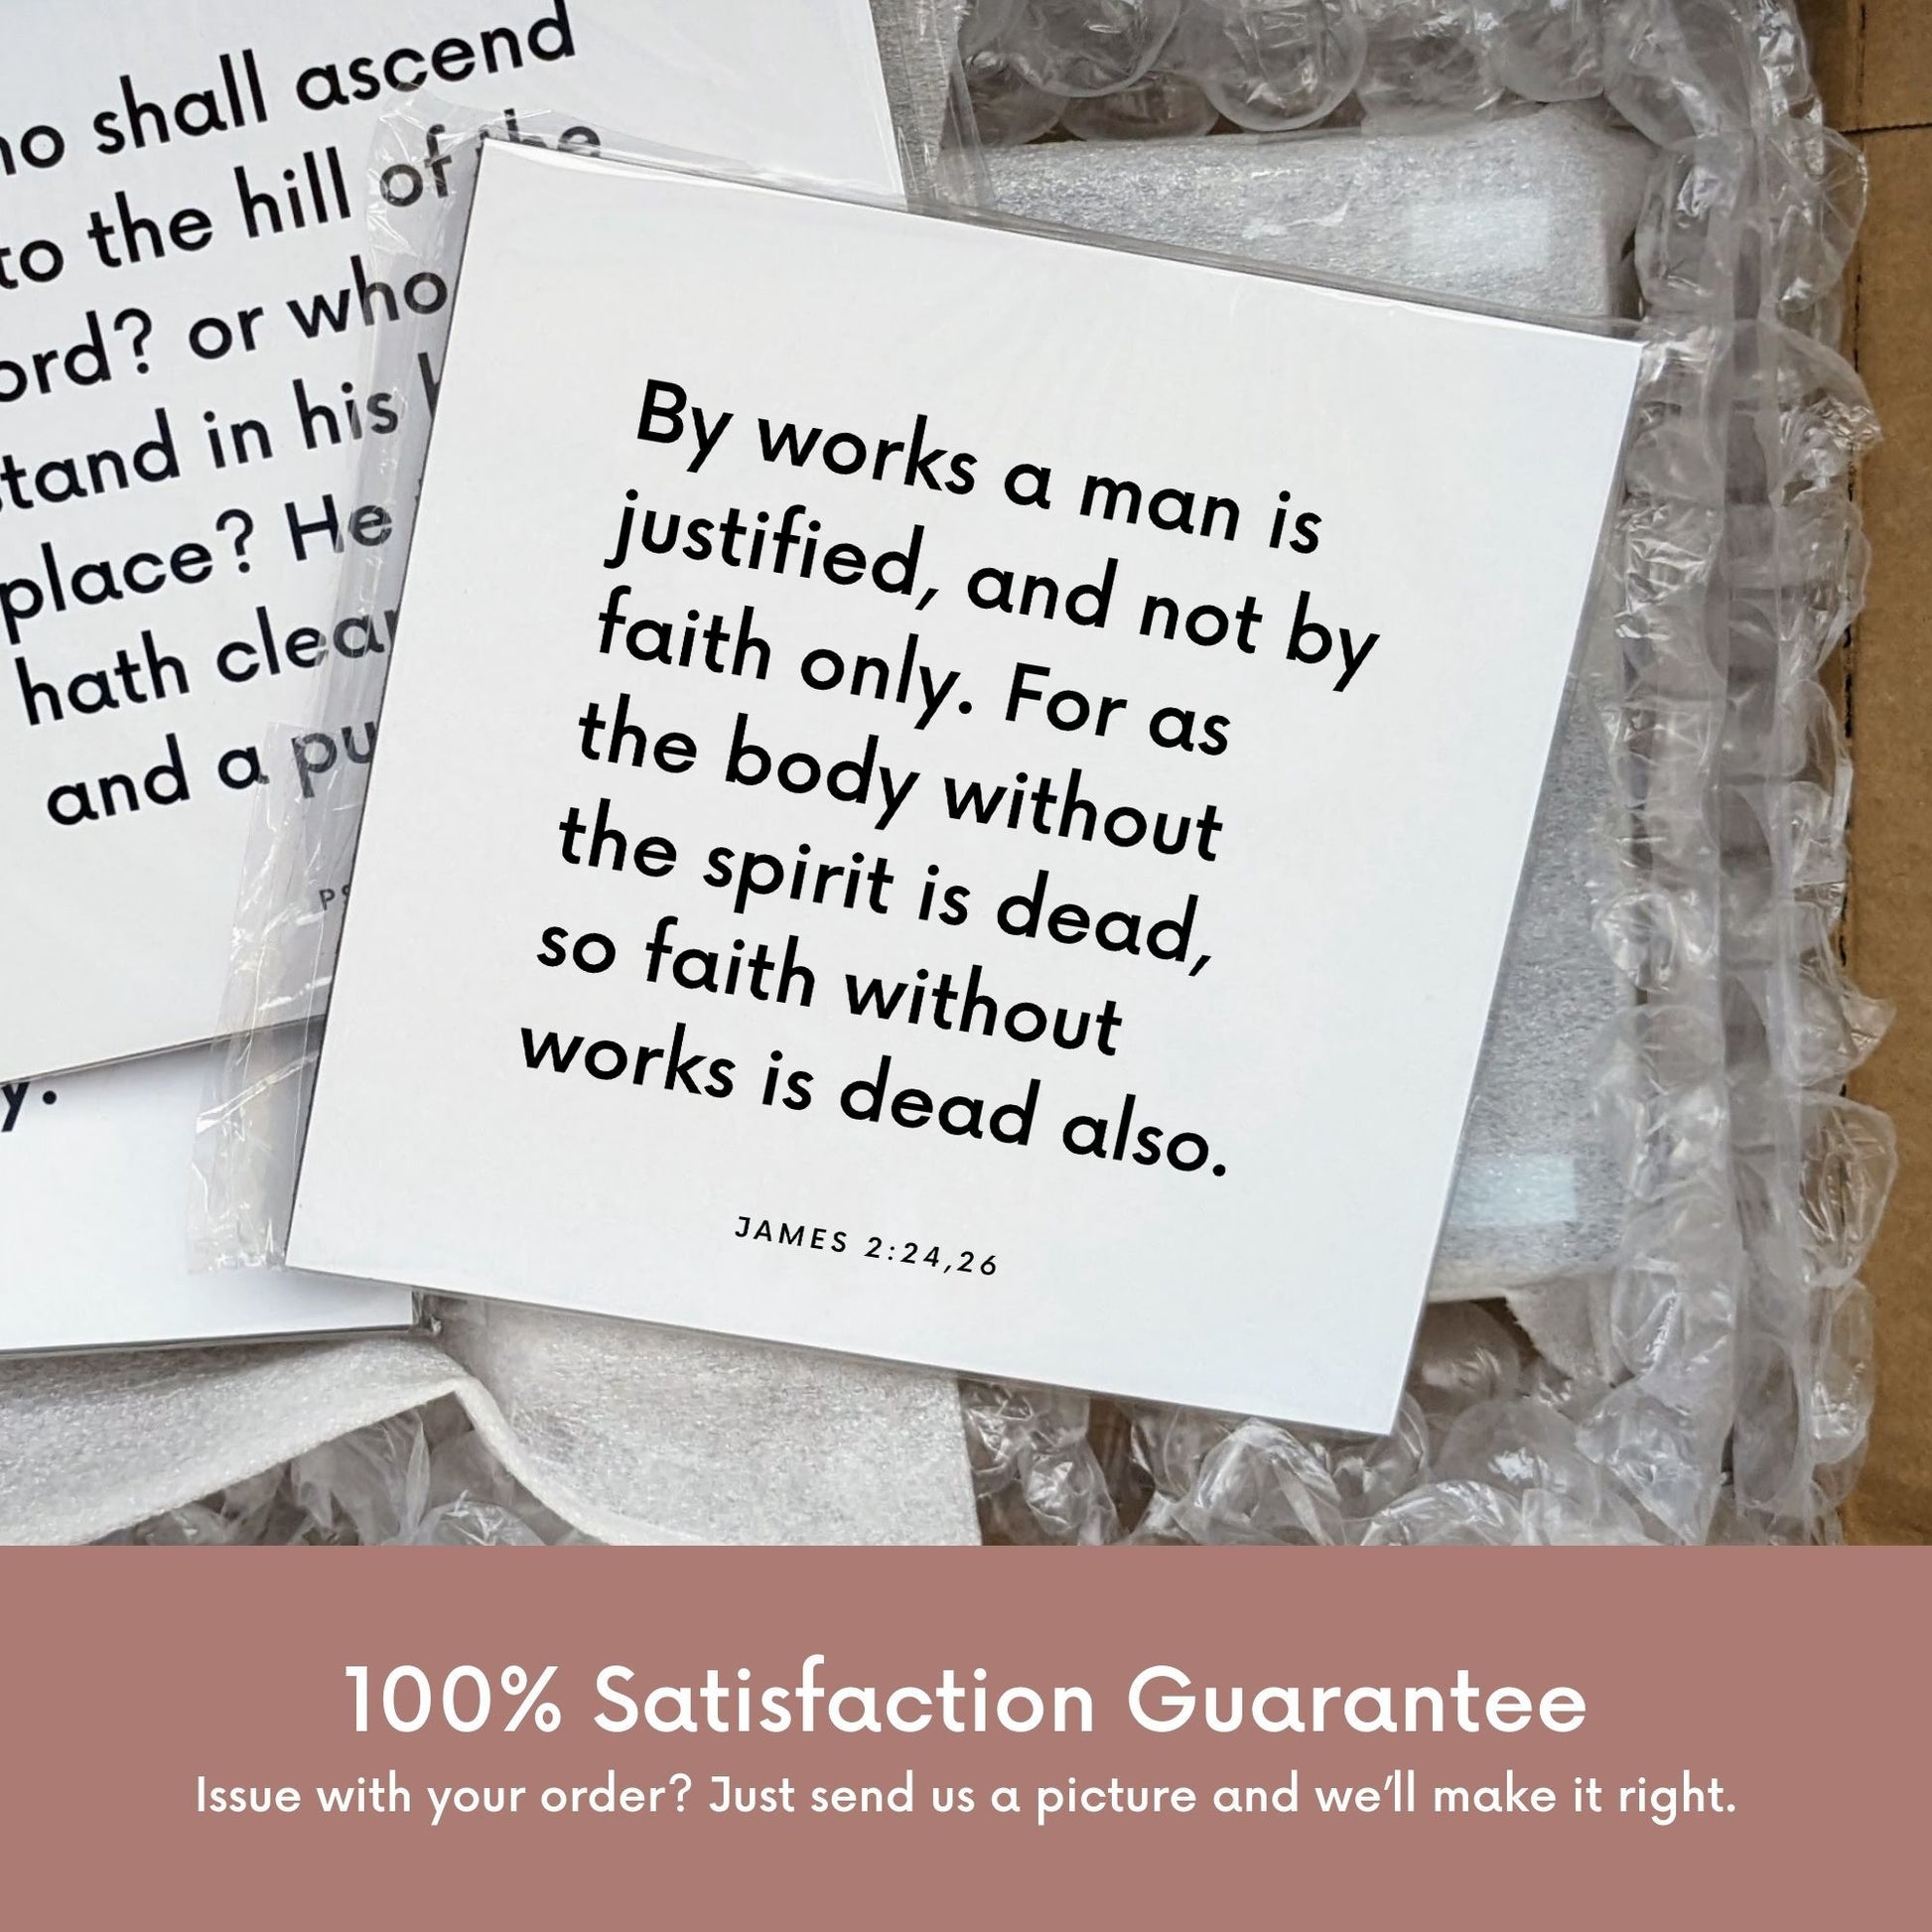 Shipping materials for scripture tile of James 2:24,26 - "By works a man is justified, and not by faith only"